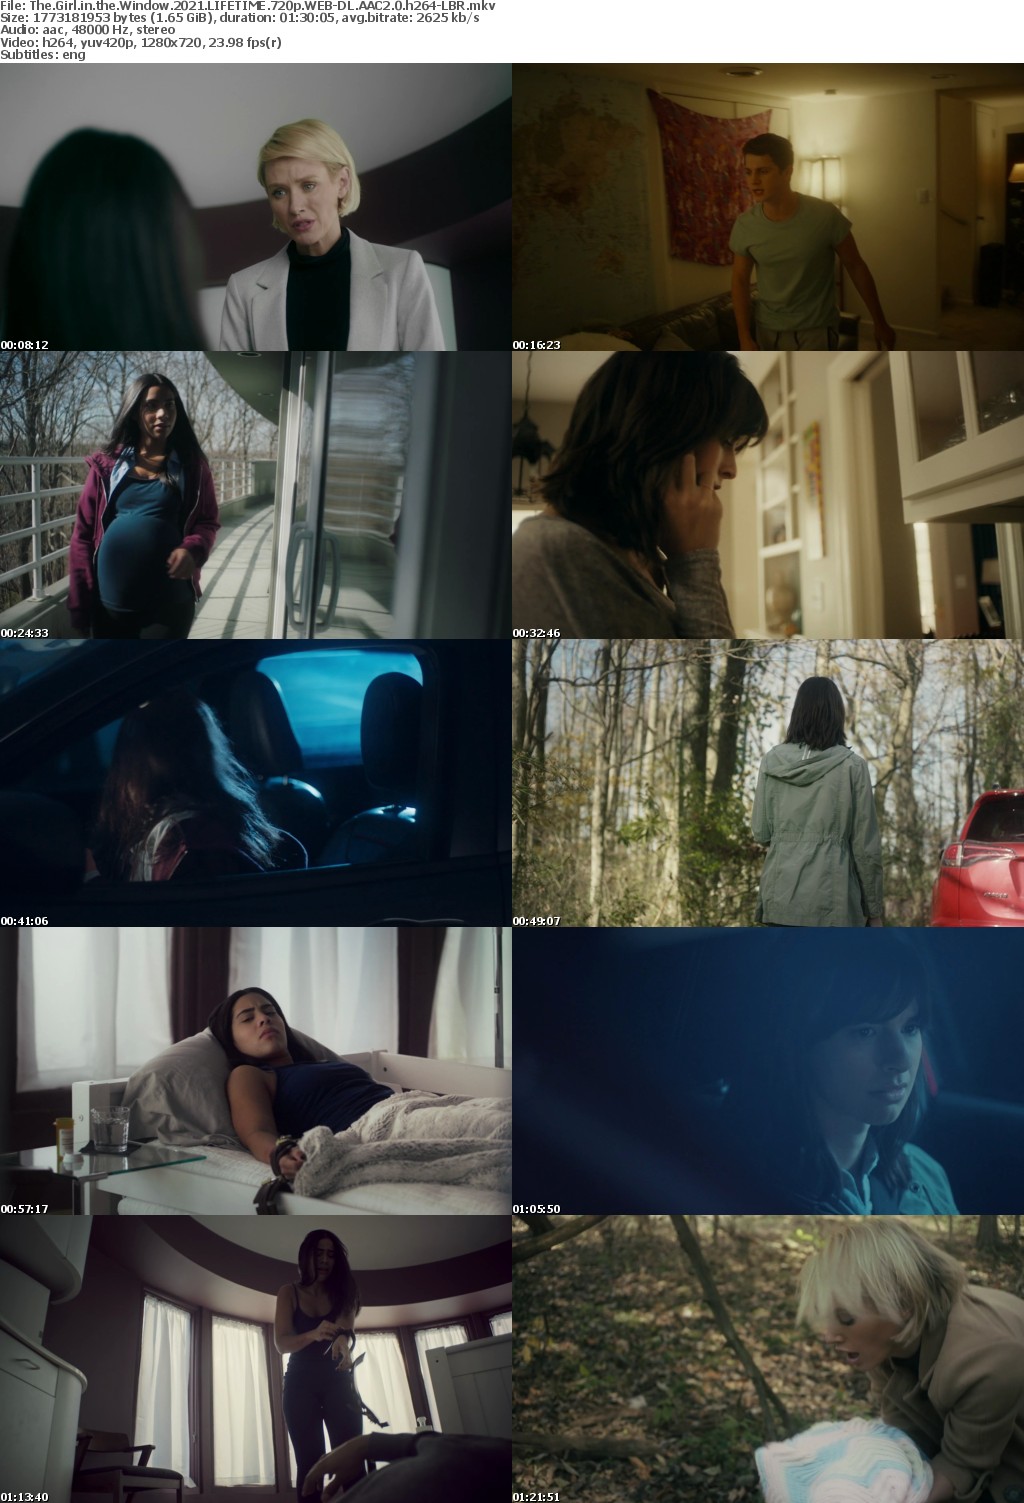 The Girl In The Window 2021 LIFETIME 720p WEB-DL AAC2 0 H264-LBR